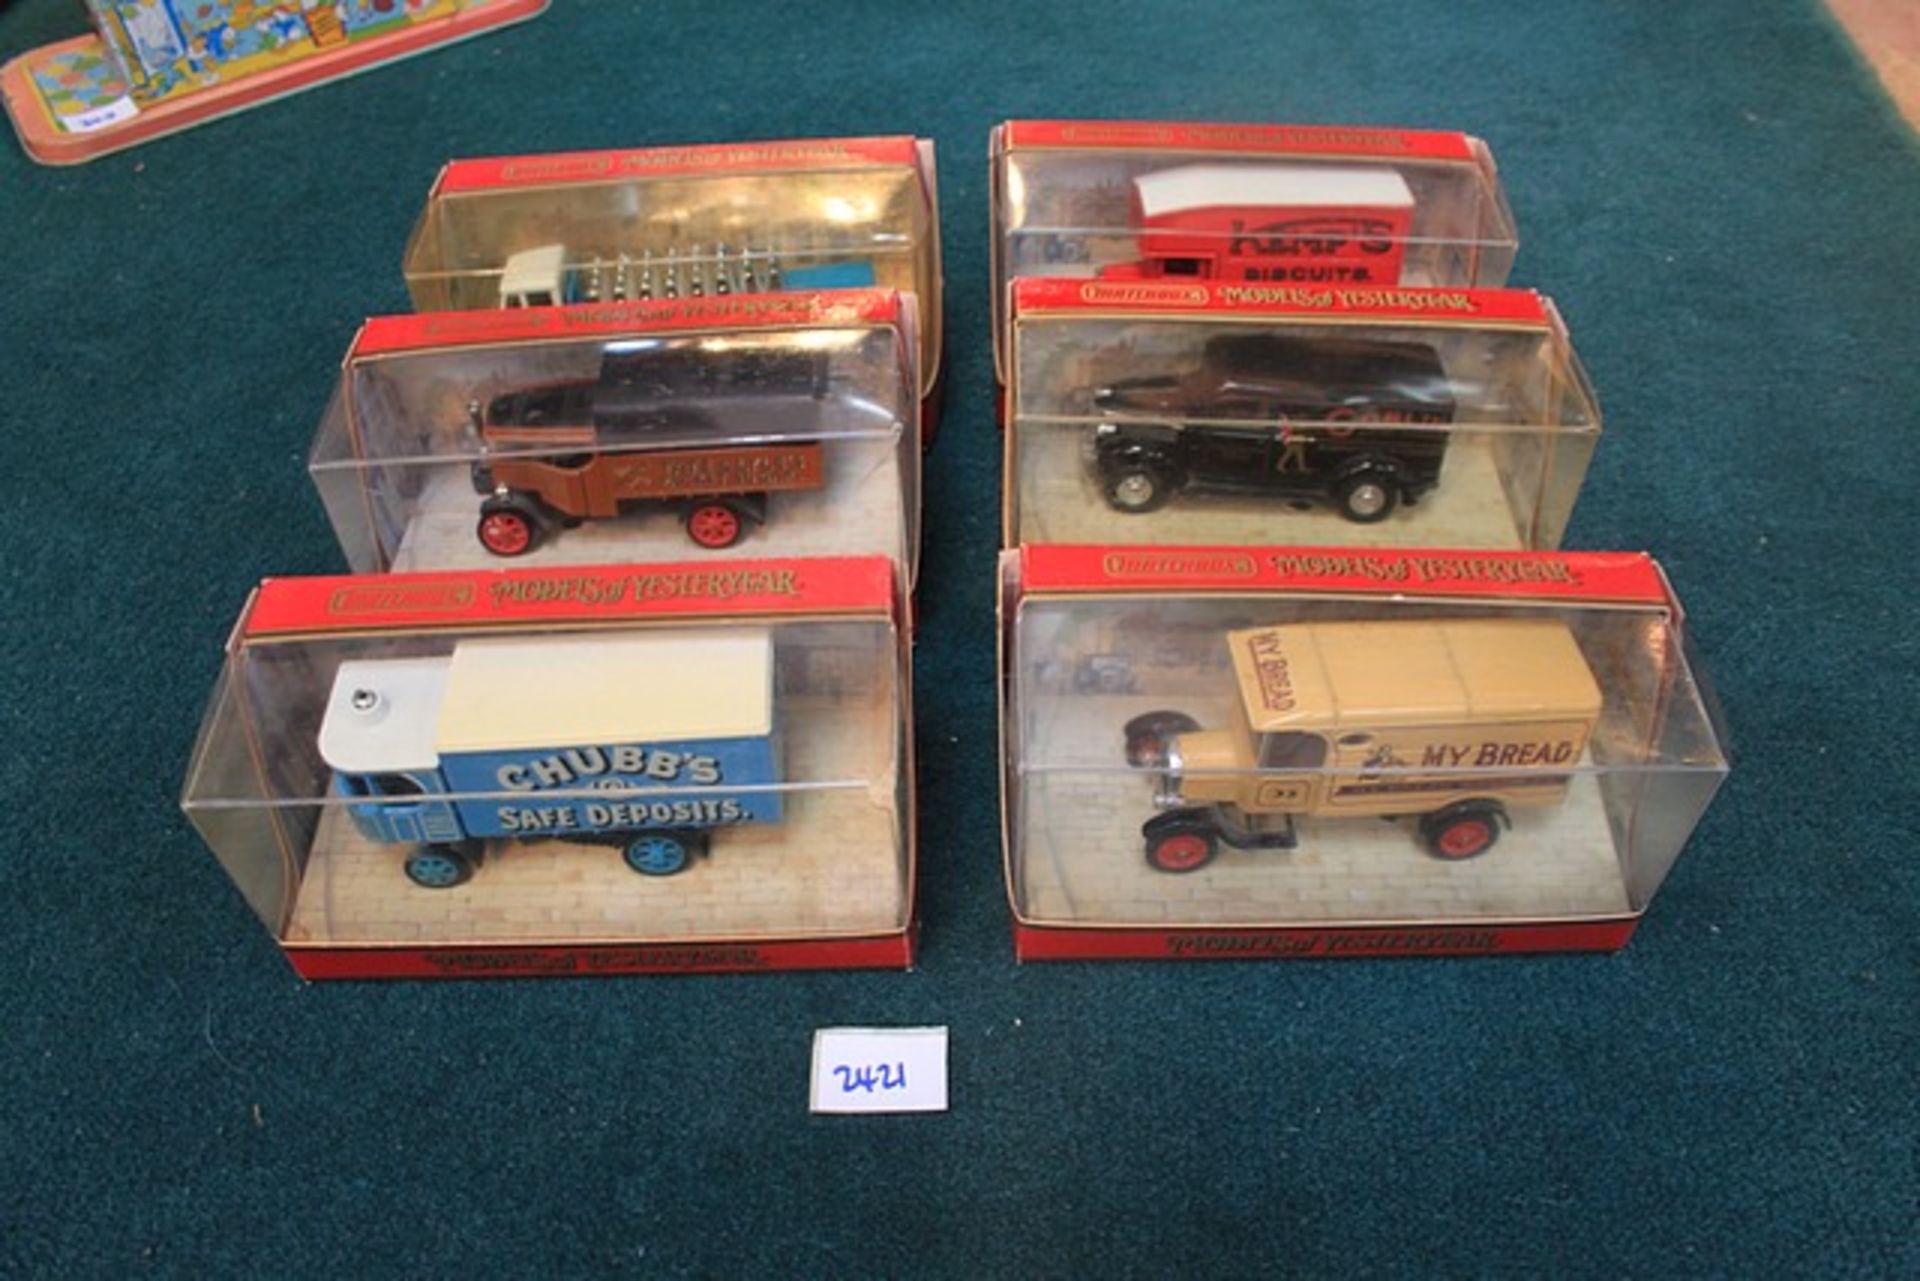 6 x Matchbox diecast Models Of Yesteryear all boxed comprising of;